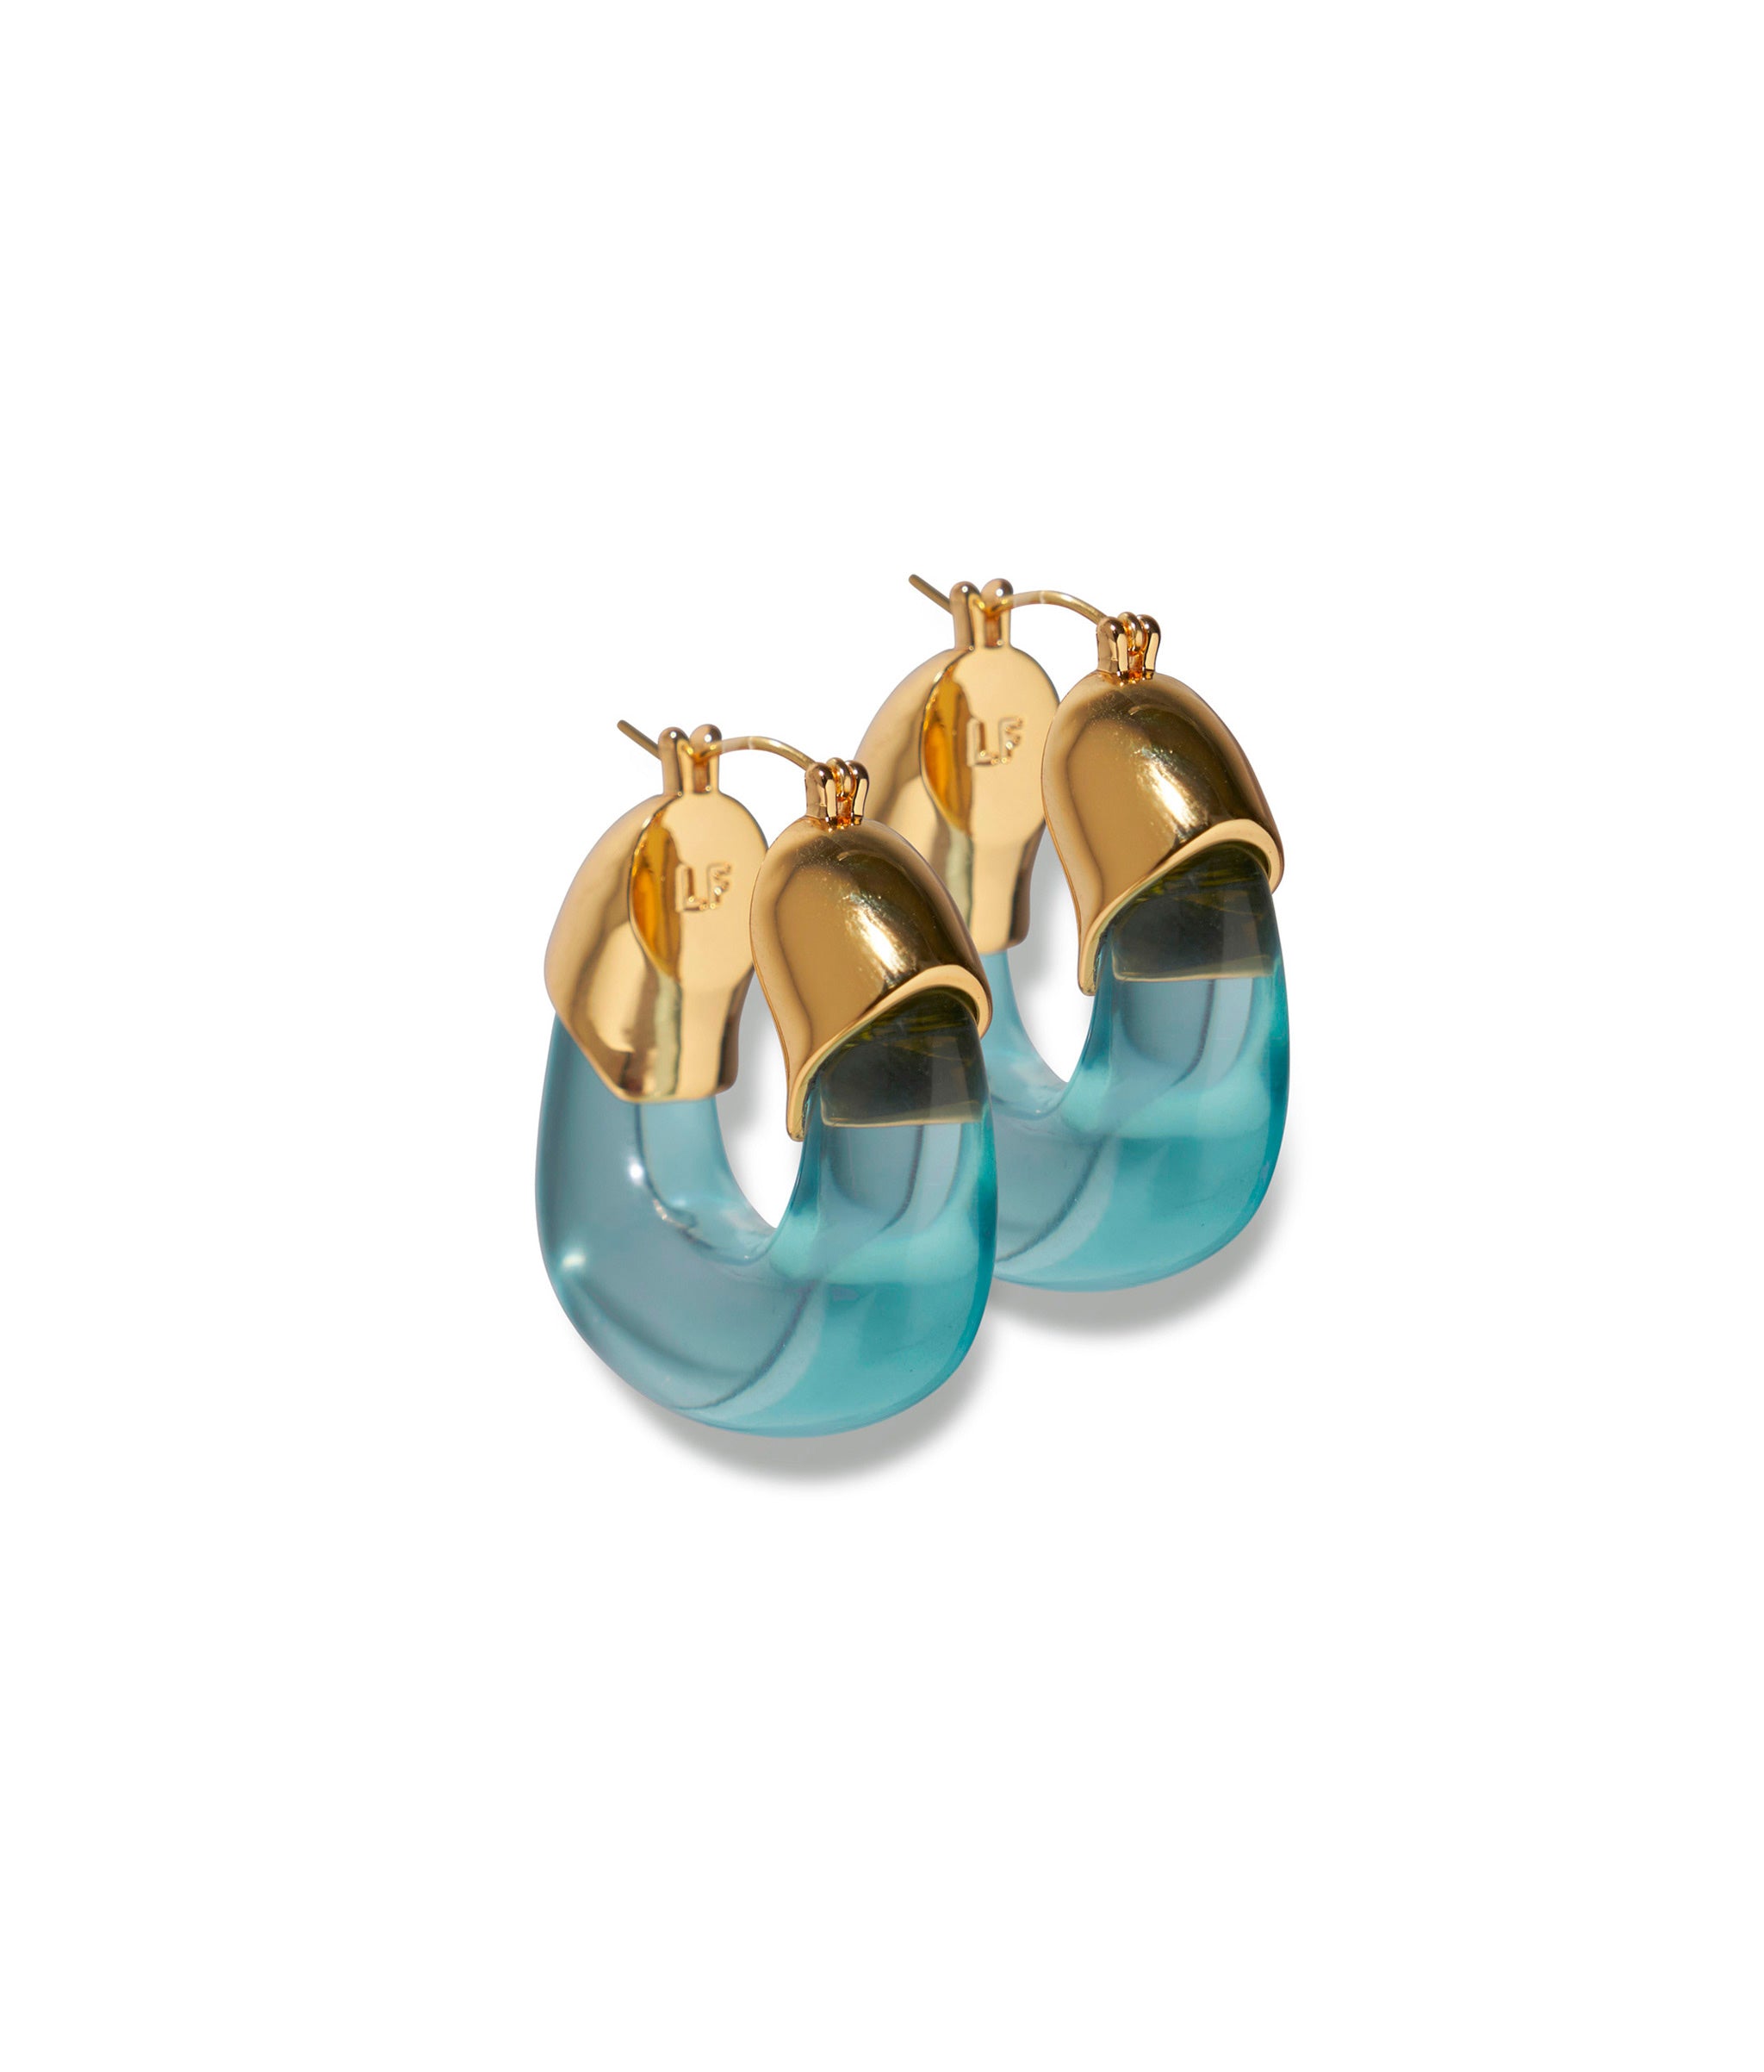 Organic Hoops in Turquoise. Gold-plated hoop earrings with transparent turquoise-colored resin.